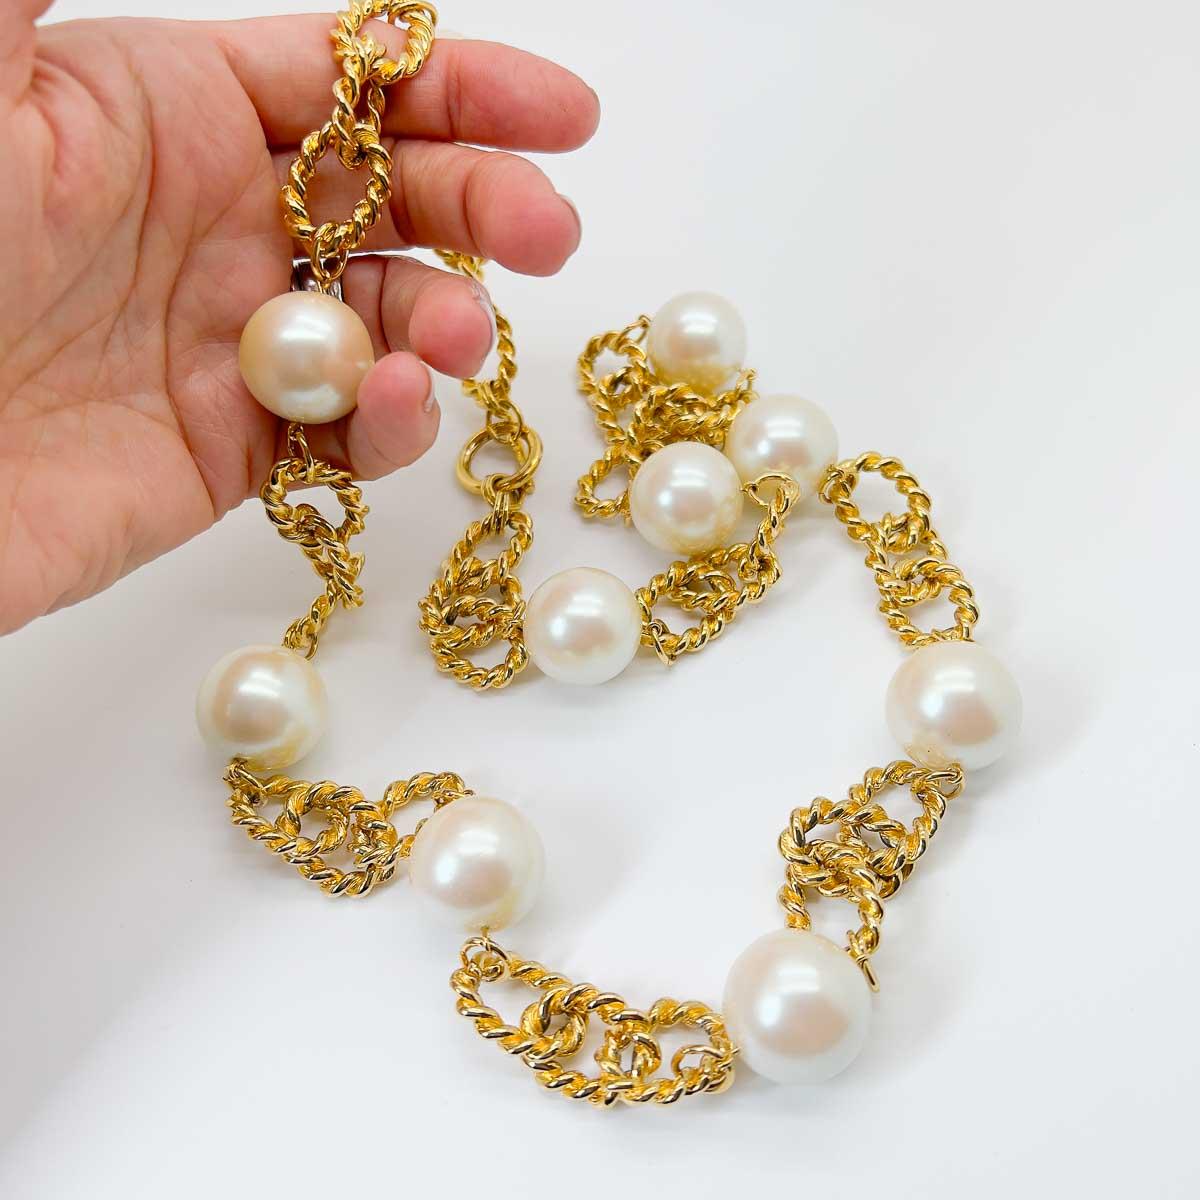 A Vintage Oversize Pearl Chain Necklace. Gigantic pearls punctuating a statement open-link rope chain, finished with a toggle clasp. The perfect timeless piece that is both chic and edgy.

An unsigned beauty. A rare treasure. Just because a jewel